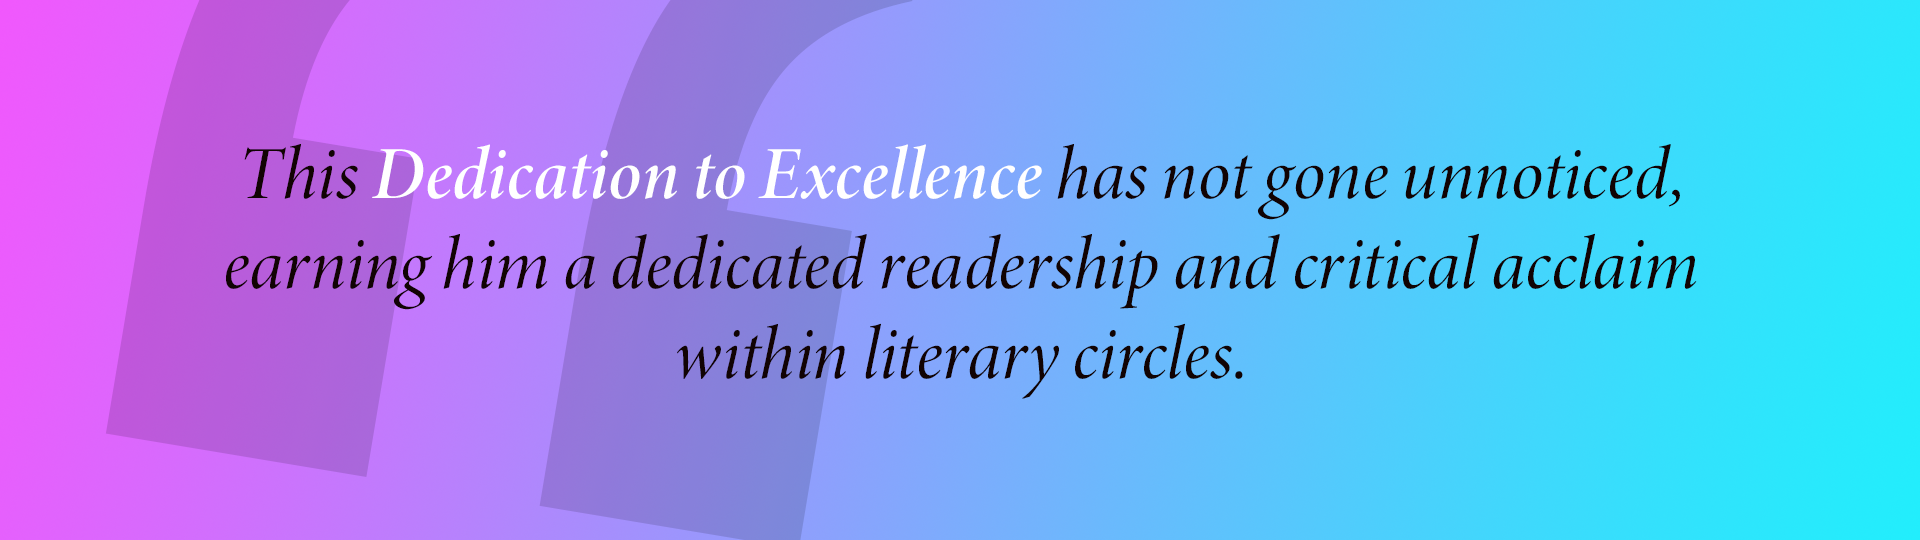 This Dedication to Excellence has not gone unnoticed,
earning him a dedicated readership and critical acclaim within literary circles.